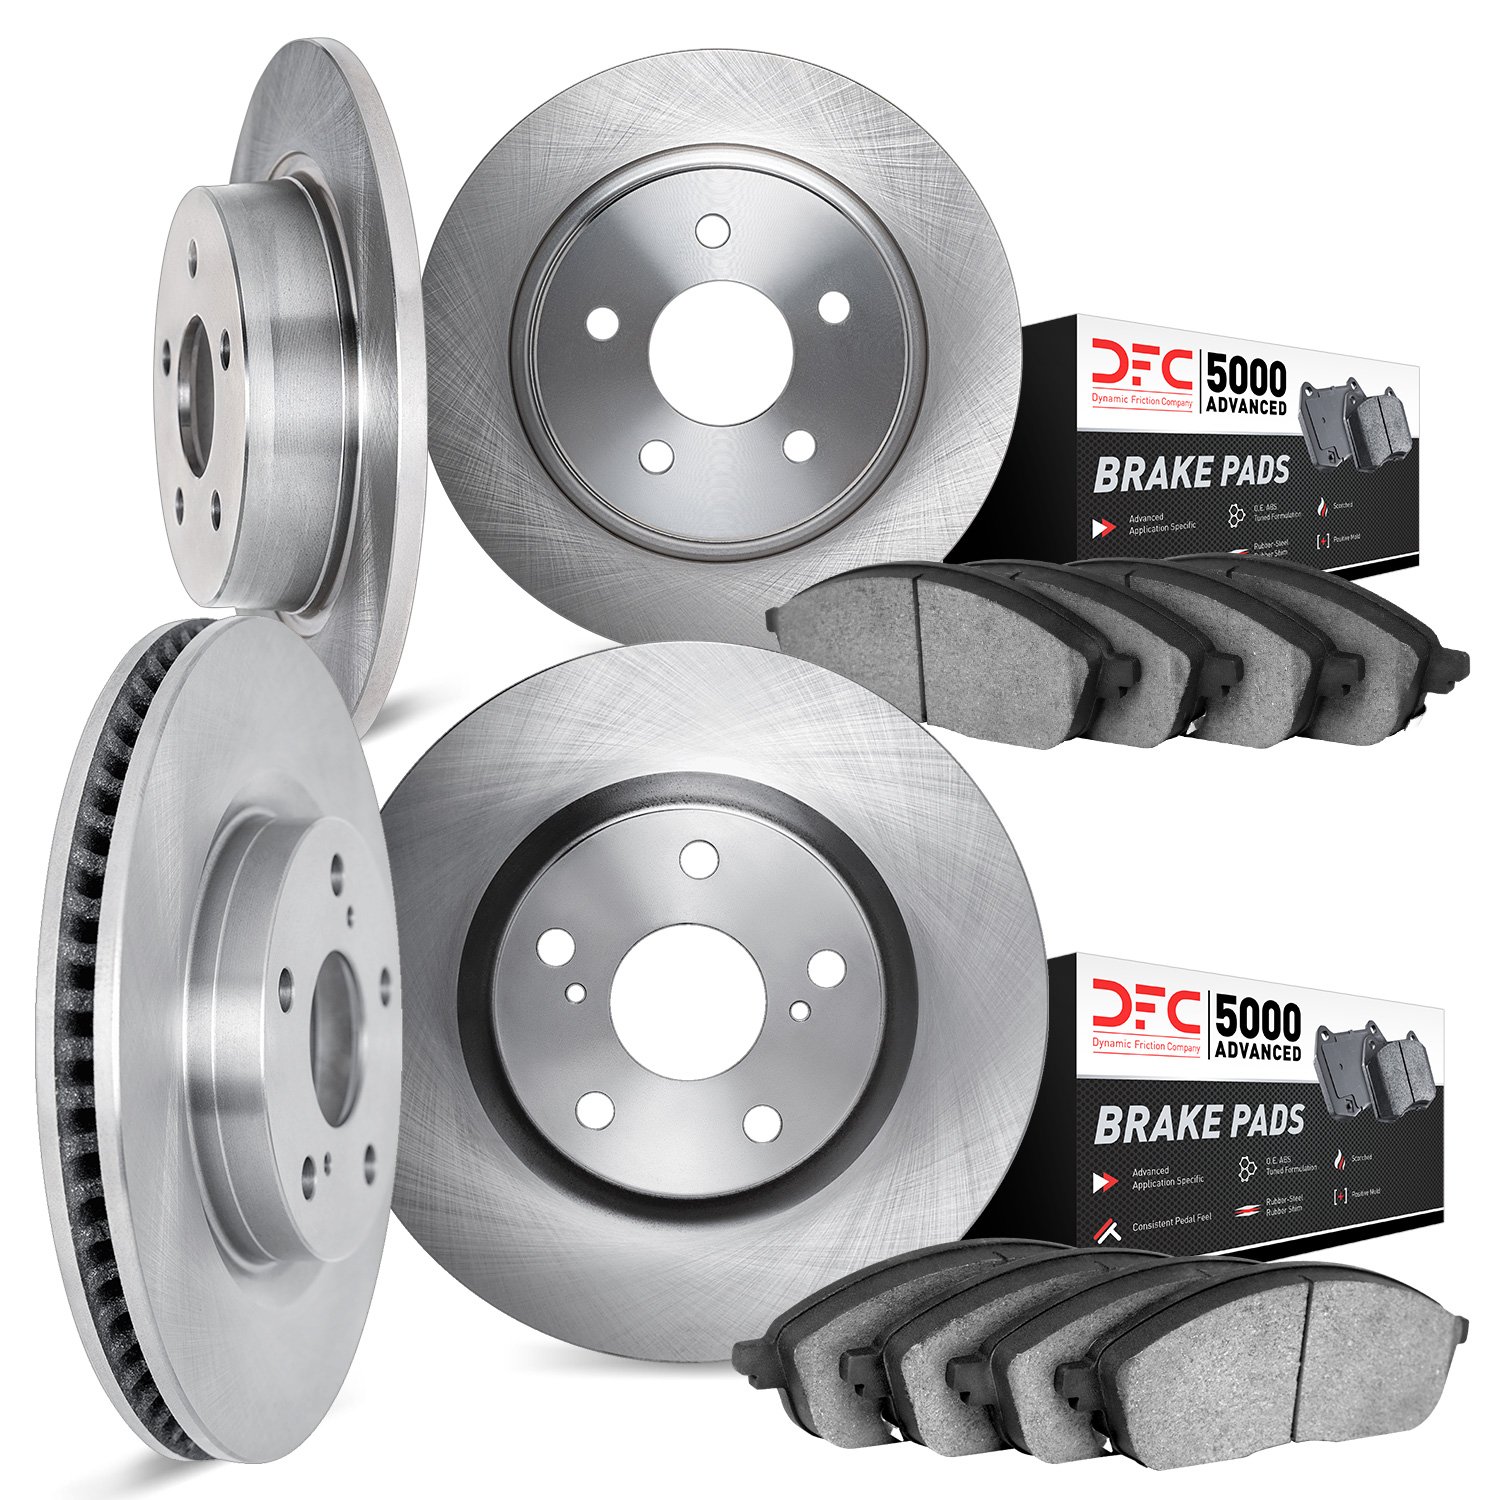 6504-31005 Brake Rotors w/5000 Advanced Brake Pads Kit, 1978-1981 BMW, Position: Front and Rear